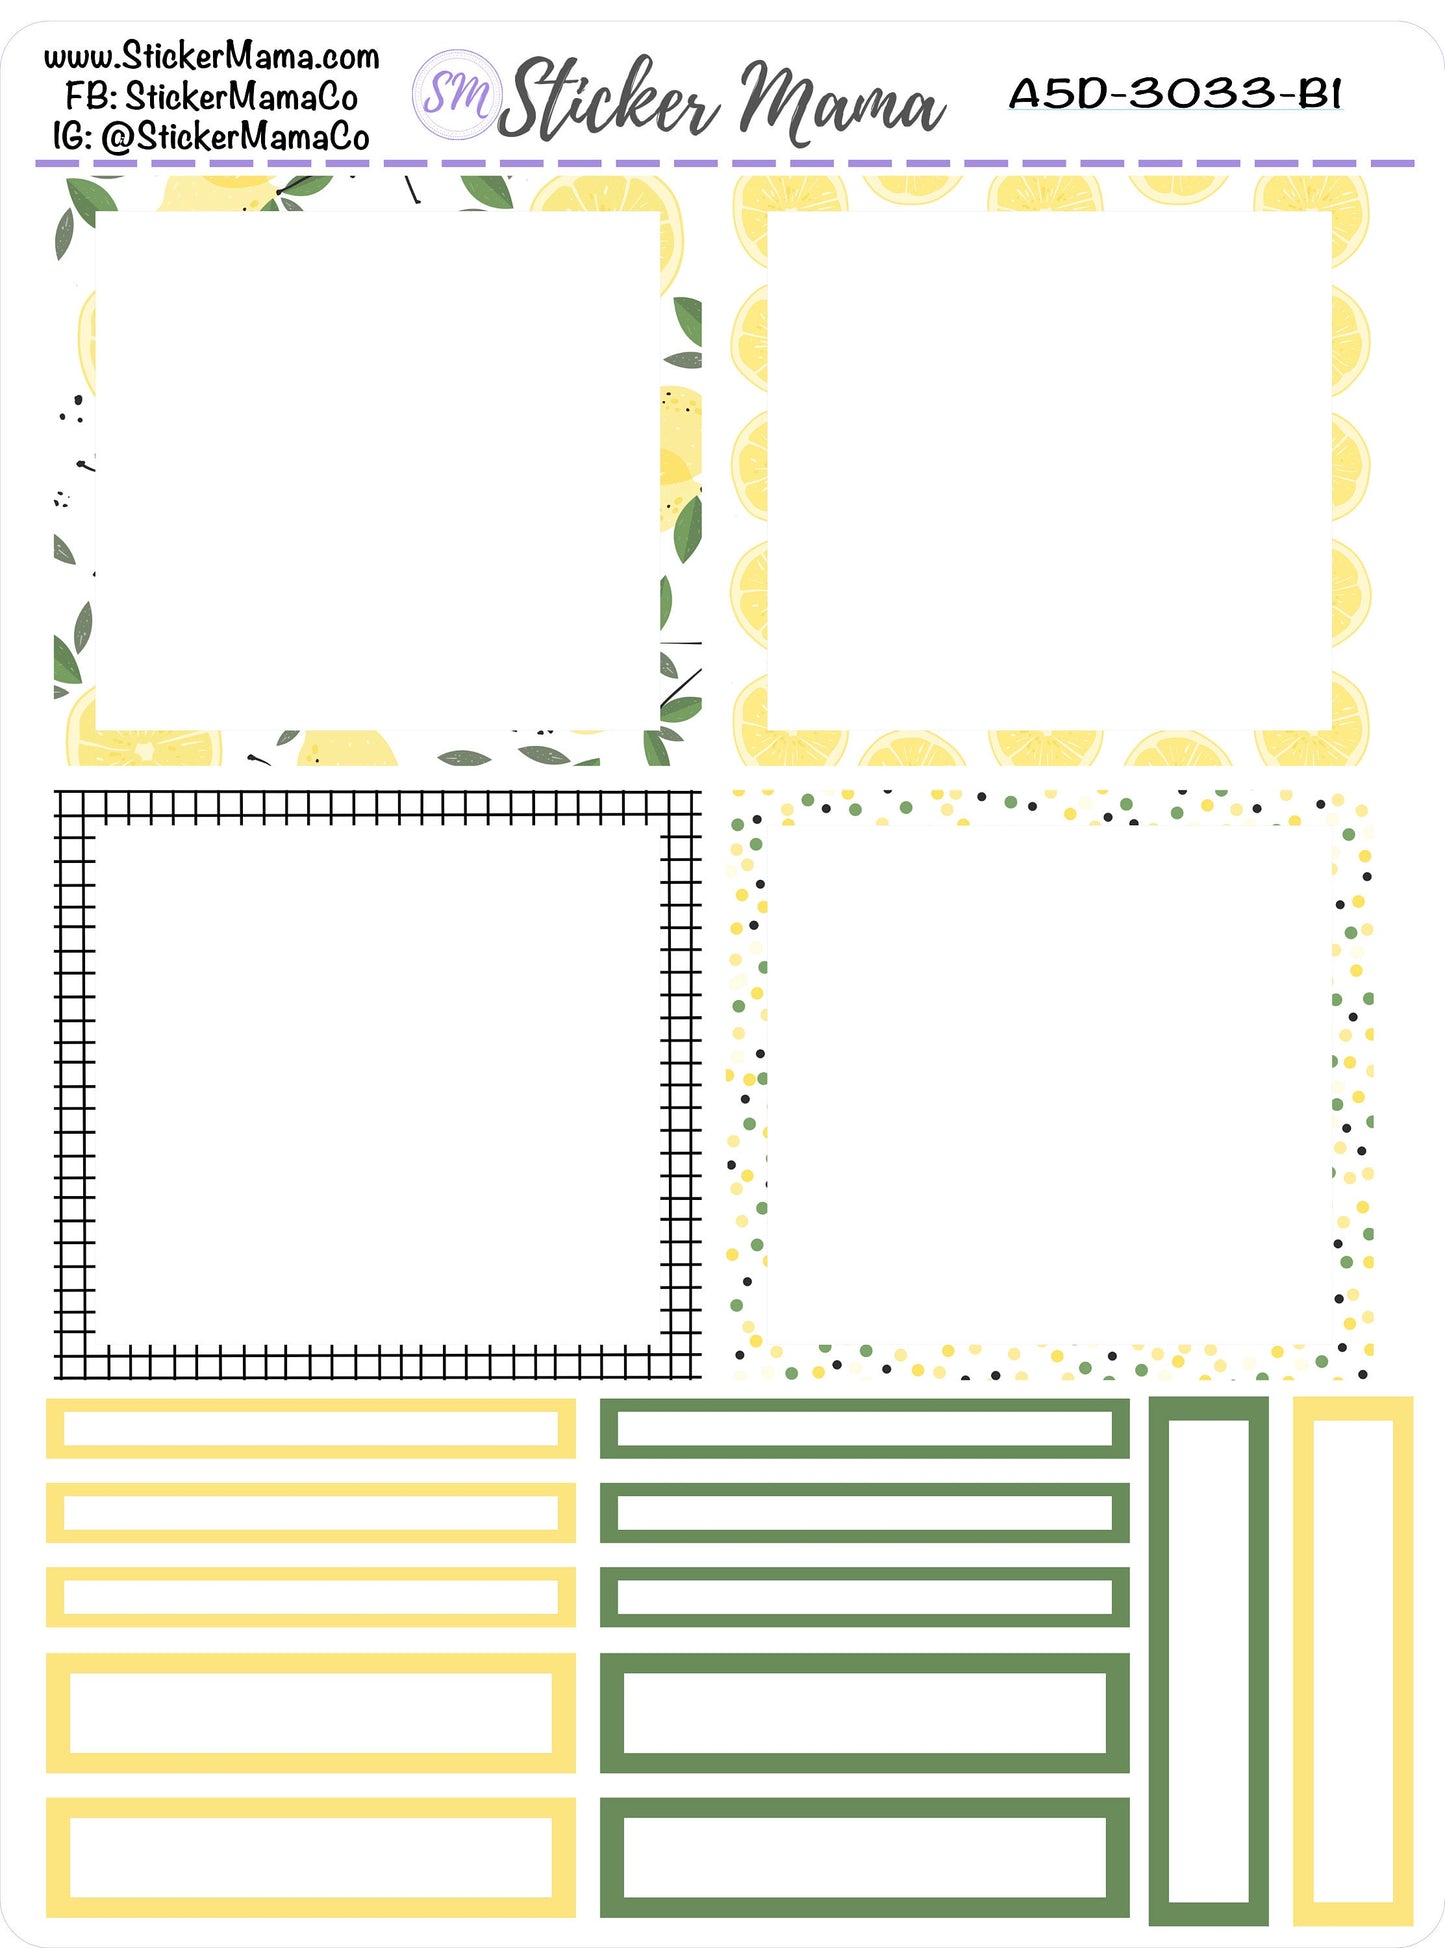 Daily A5/Daily Duo A5 -3033 - Lemons || Erin Condren Daily Duo A5 Agenda Planner Kit || A5 Daily Sticker Kit